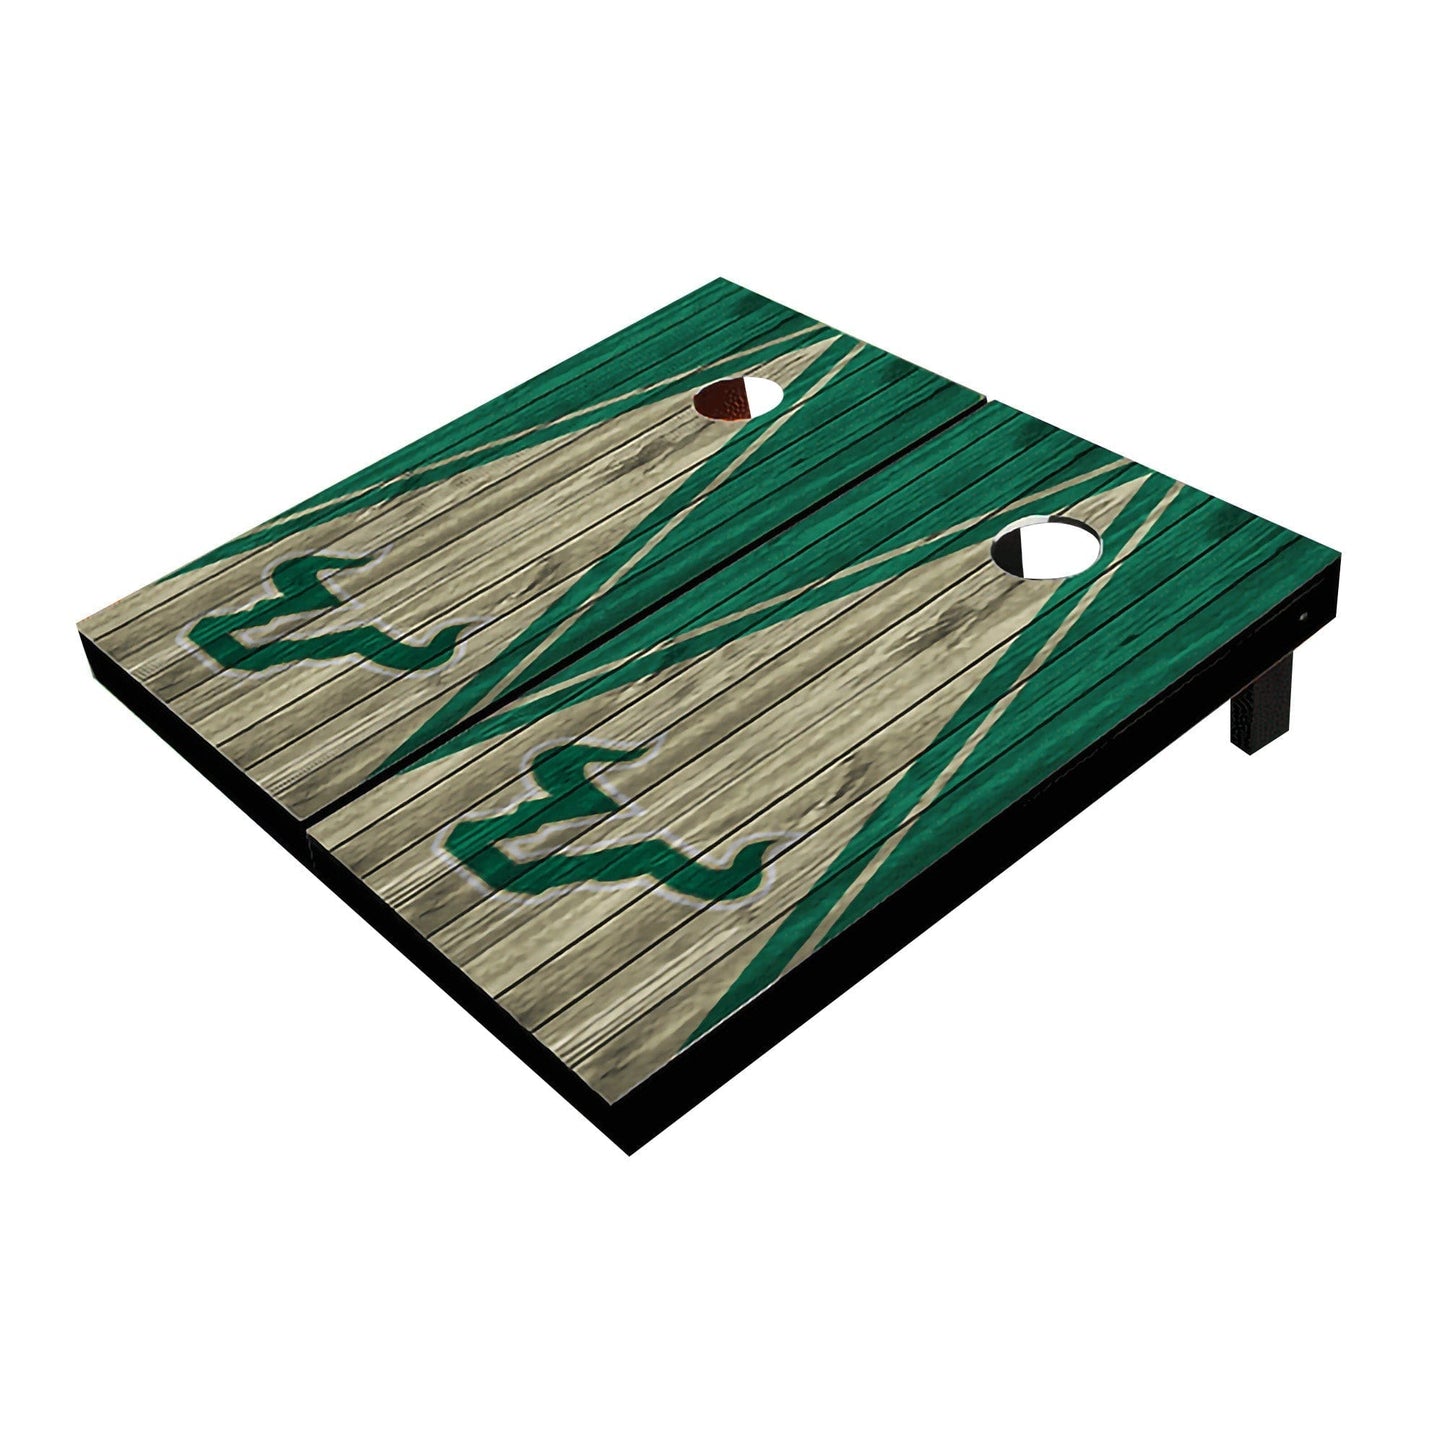 South Florida USF Bulls Gold And Green Matching Triangle All-Weather Cornhole Boards